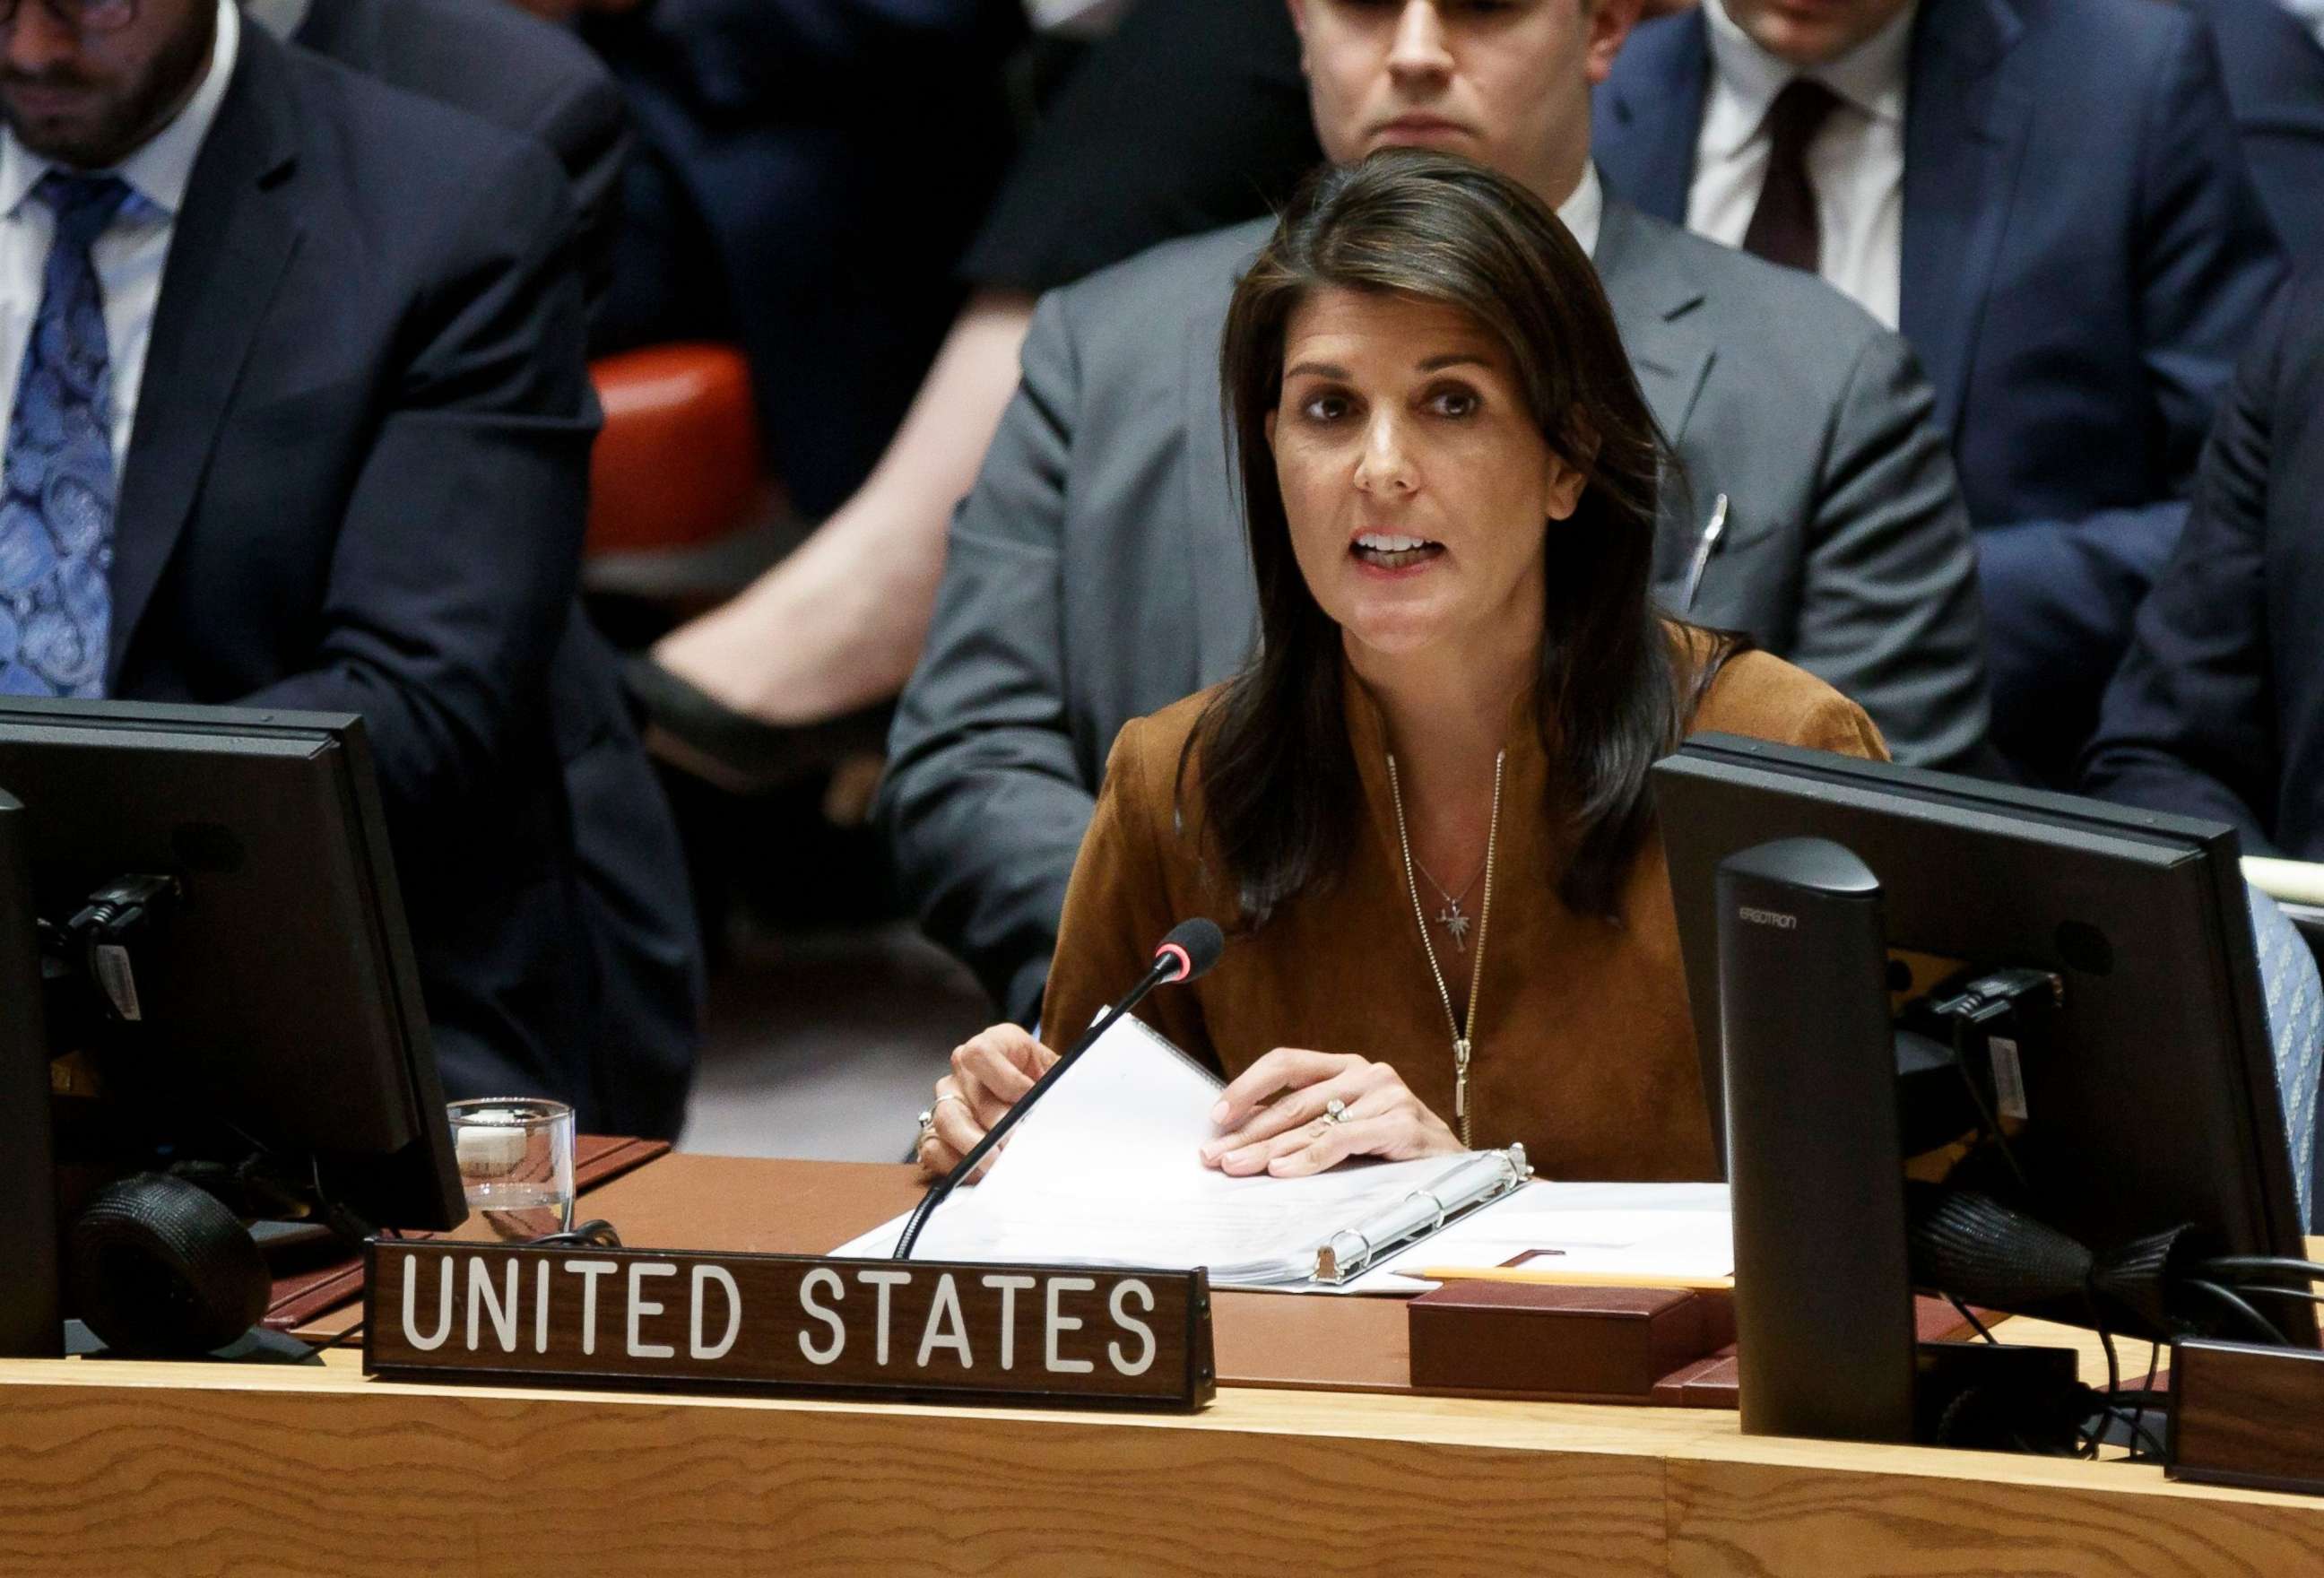 PHOTO: Nikki Haley addresses an emergency United Nations Security Council meeting in response to a suspected chemical weapons attack in Syria at United Nations headquarters in New York, April 9, 2018.